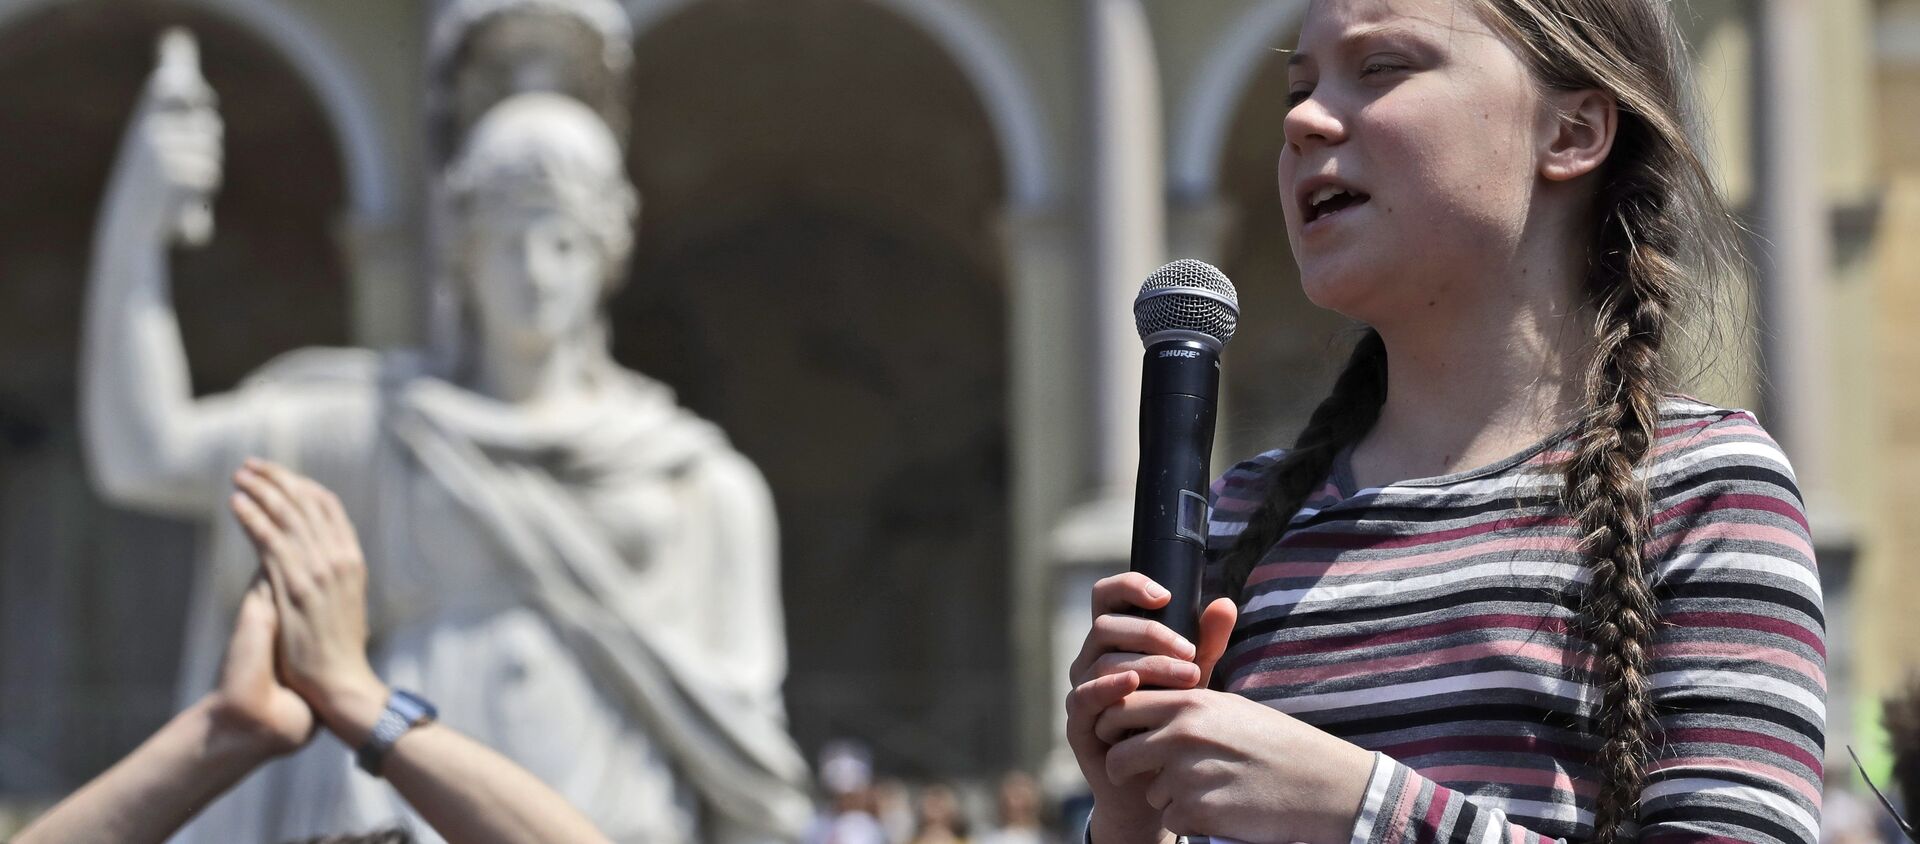 Swedish teenager and environmental activist Greta Thunberg speaks during a Fridays for Future rally in Rome, on 19, April 2019. Thunberg was in Rome to headline Friday's school strike, the growing worldwide youth movement she spearheaded, demanding faster action against climate change. - Sputnik International, 1920, 01.10.2019